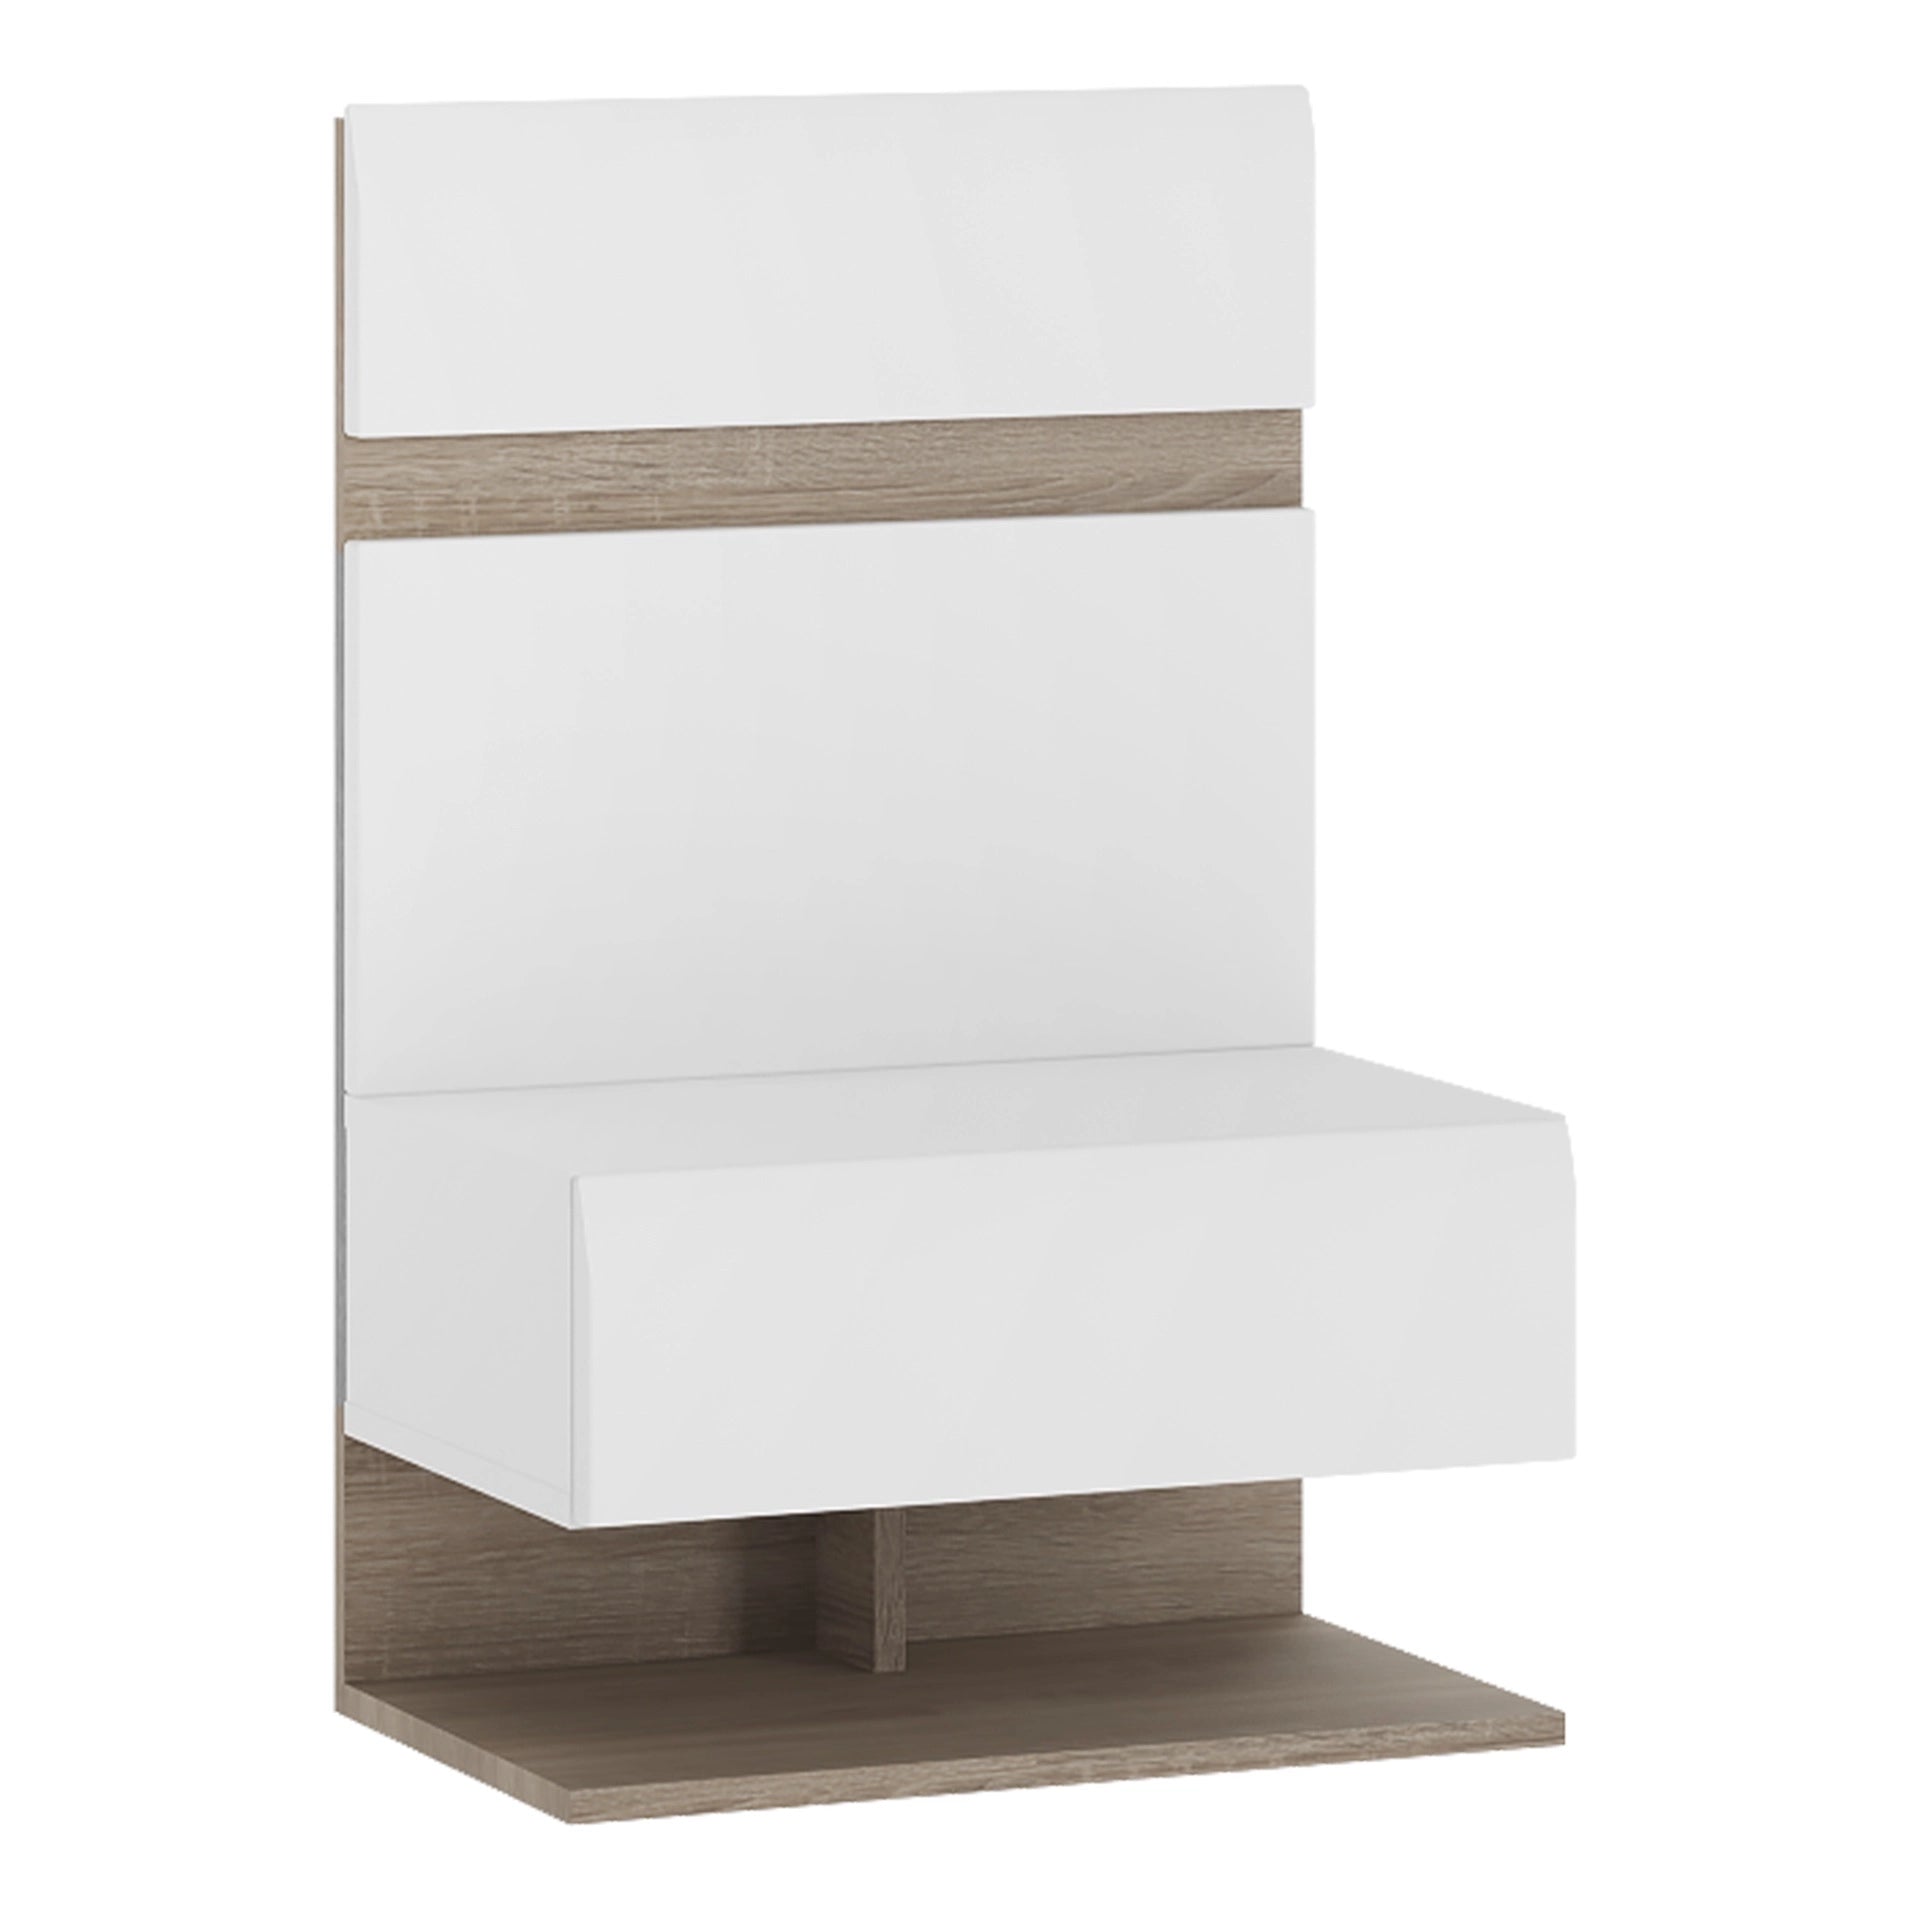 Furniture To Go Chelsea Bedside Extension For Bed in White with Oak Trim